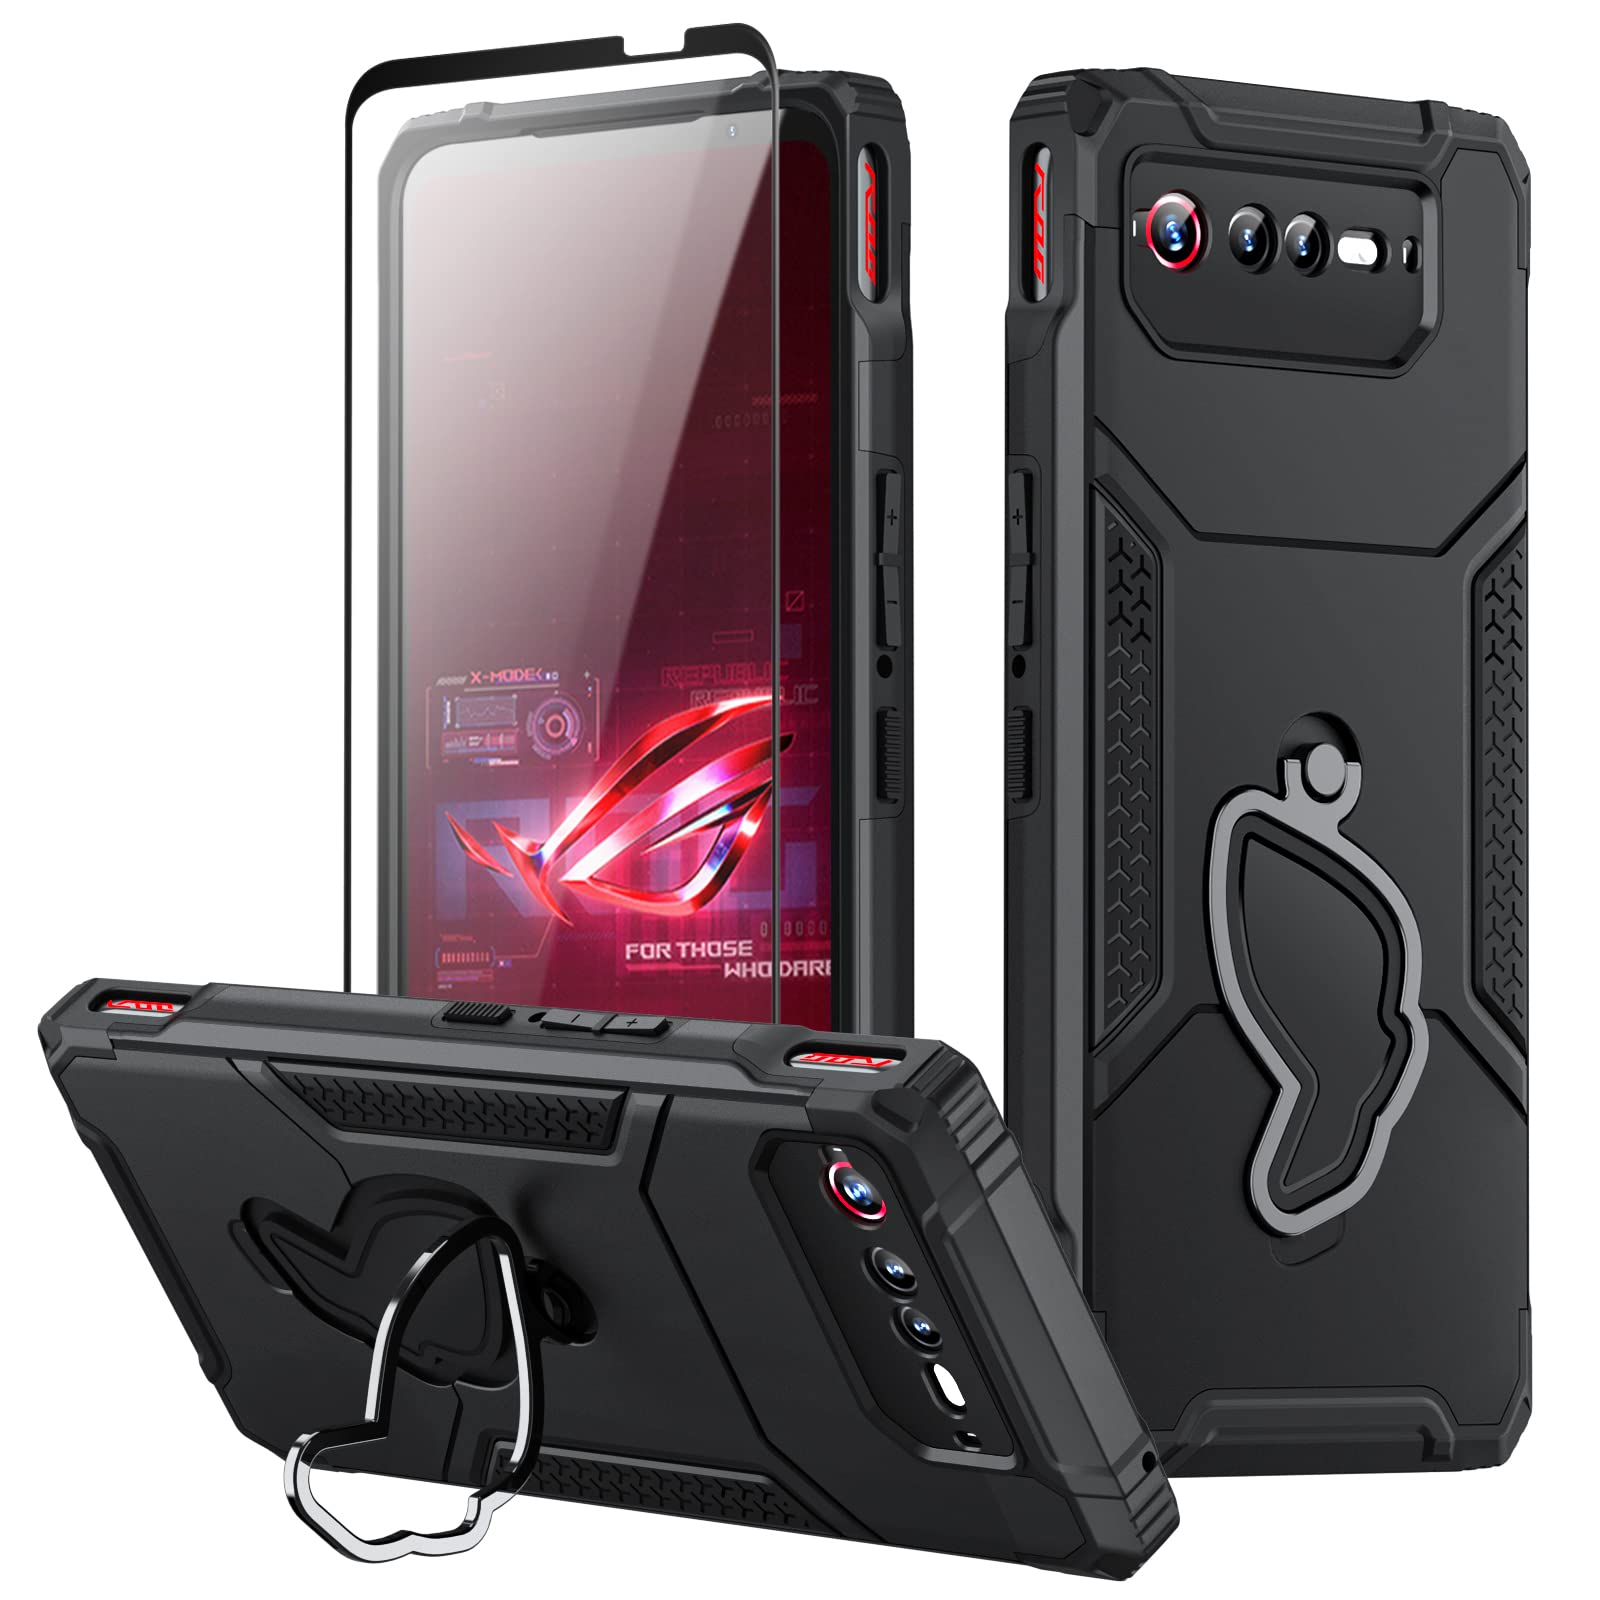 Fanbiya Armor Case for ASUS ROG Phone 6, 6 Pro Case with Kickstand & Camera Protector, 360° Full Body Protection Rugged Shockproof Case with Tempered Glass, Black